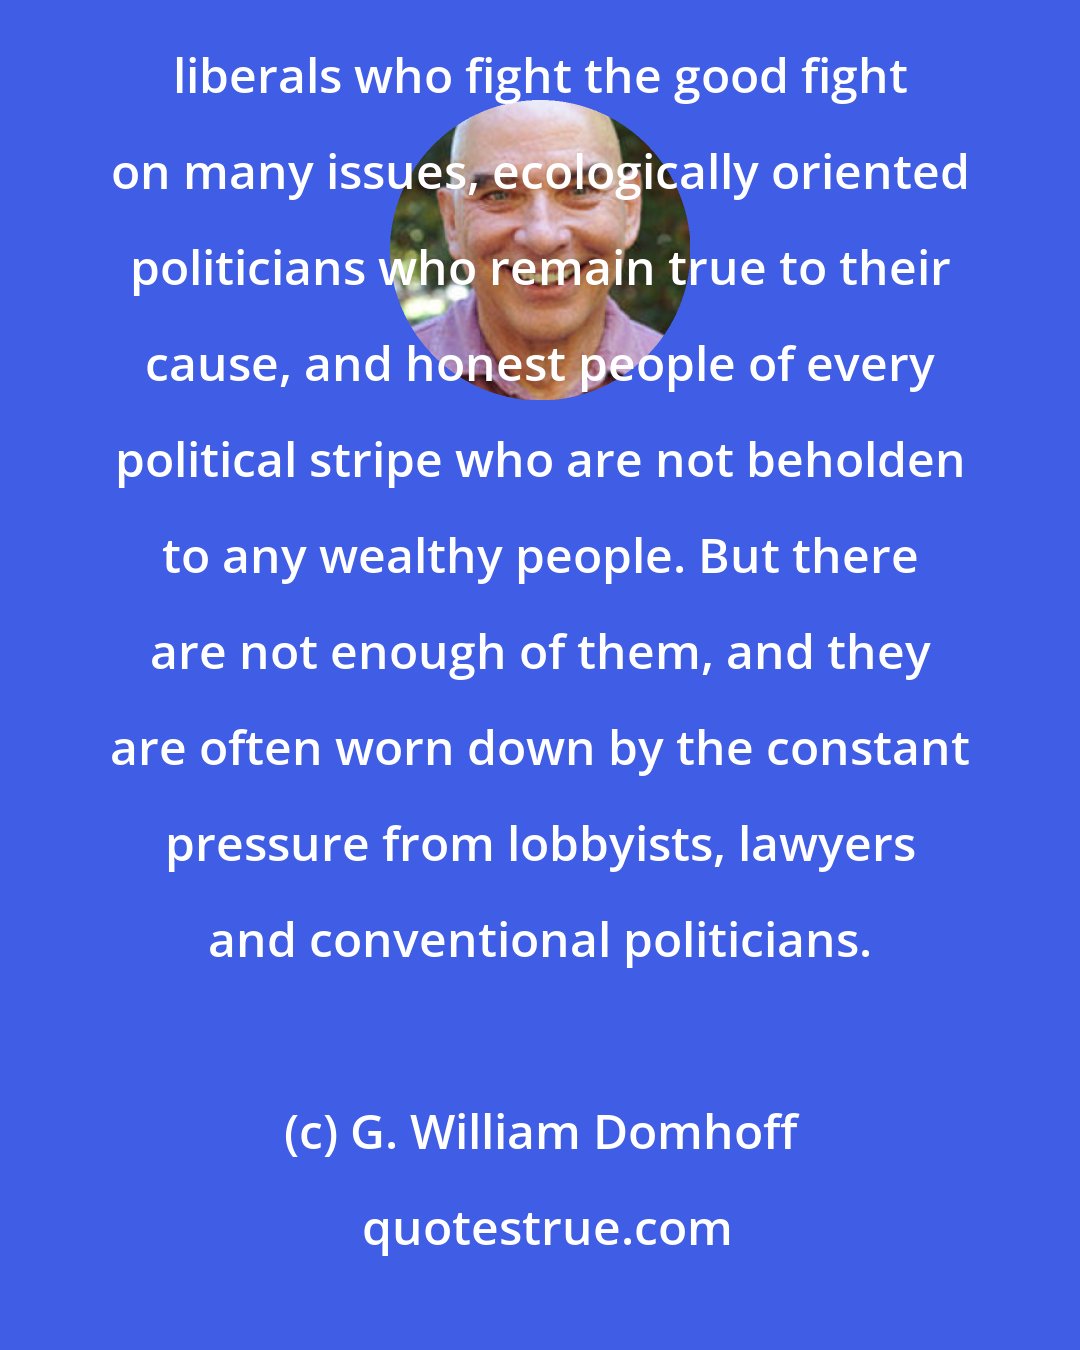 G. William Domhoff: There is more to American politics than fat cats and their political friends. There are serious-minded liberals who fight the good fight on many issues, ecologically oriented politicians who remain true to their cause, and honest people of every political stripe who are not beholden to any wealthy people. But there are not enough of them, and they are often worn down by the constant pressure from lobbyists, lawyers and conventional politicians.